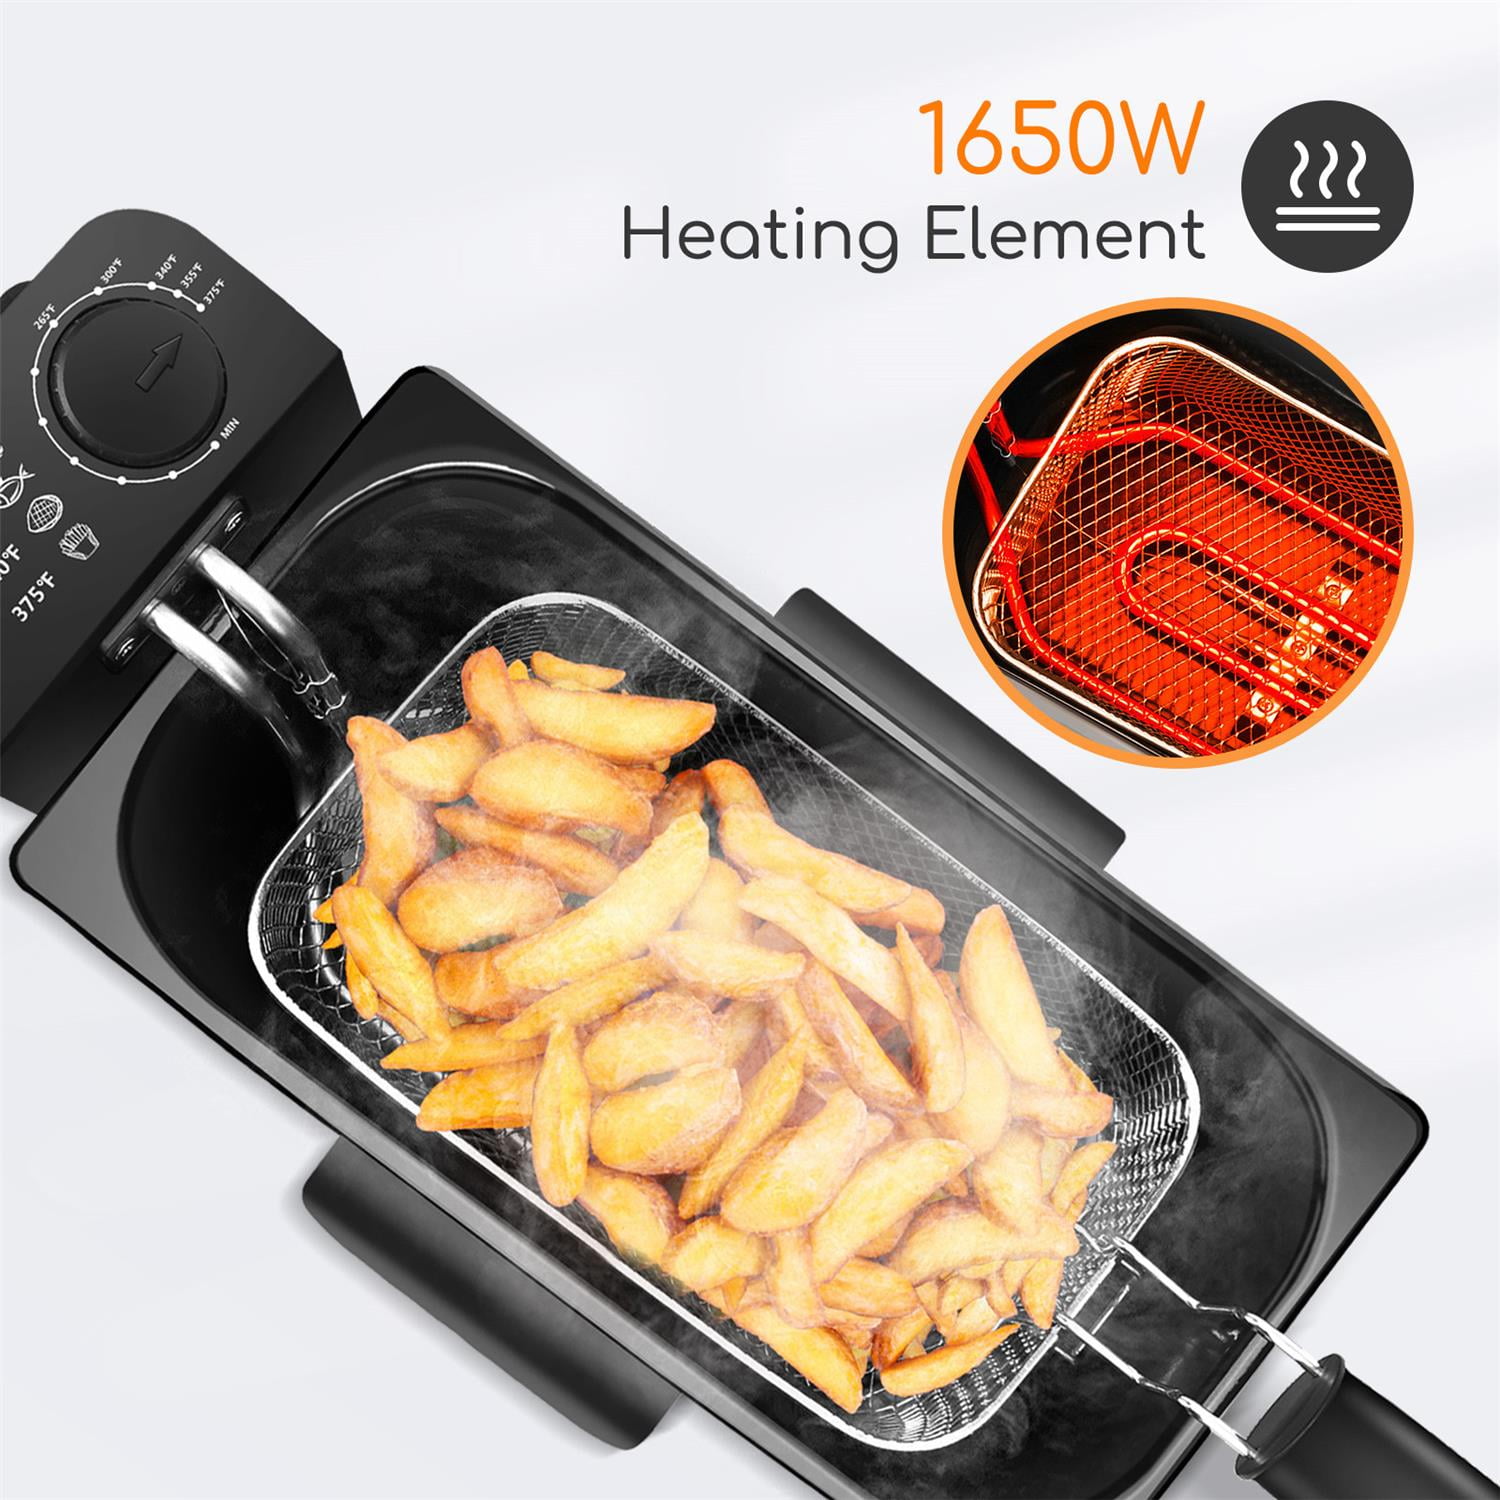 Premium LEVELLA 3.2 Qt. Stainless Steel Deep Fryer with Fry Basket PDF302T  - The Home Depot